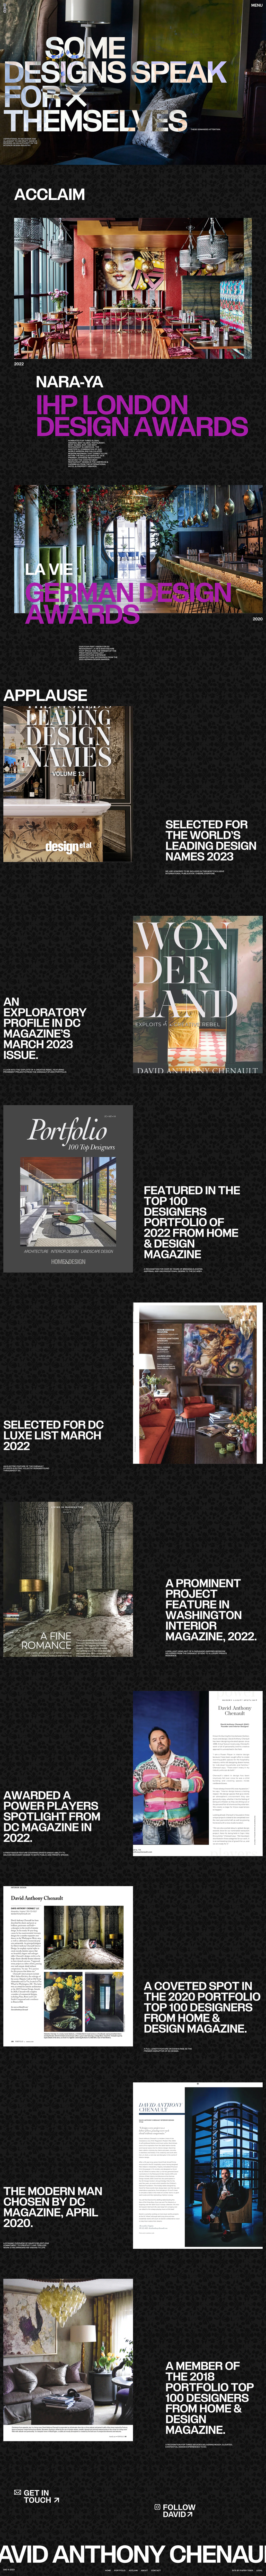 David Anthony Chenault Landing Page Example: Award-winning decadence from the studio of David Anthony Chenault, the authority of interior design in Washington D.C.